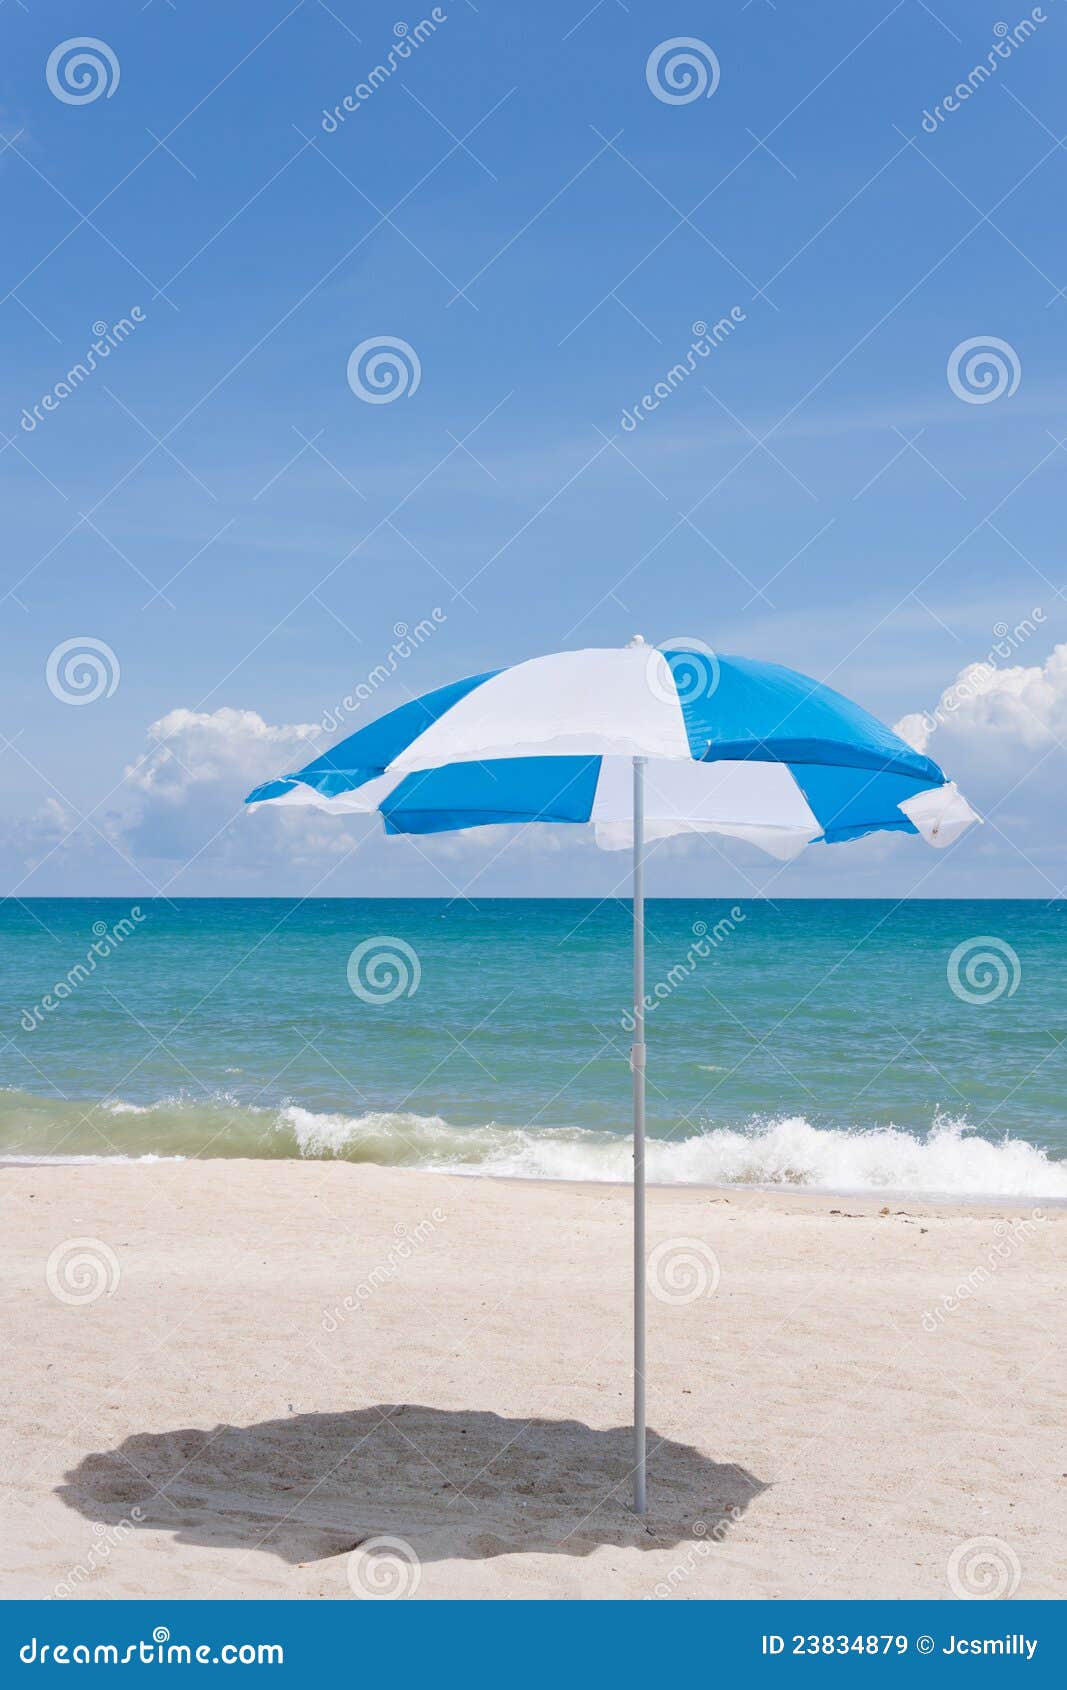 Blue Beach Umbrella On A Sunny Day Royalty Free Stock Images - Image ...